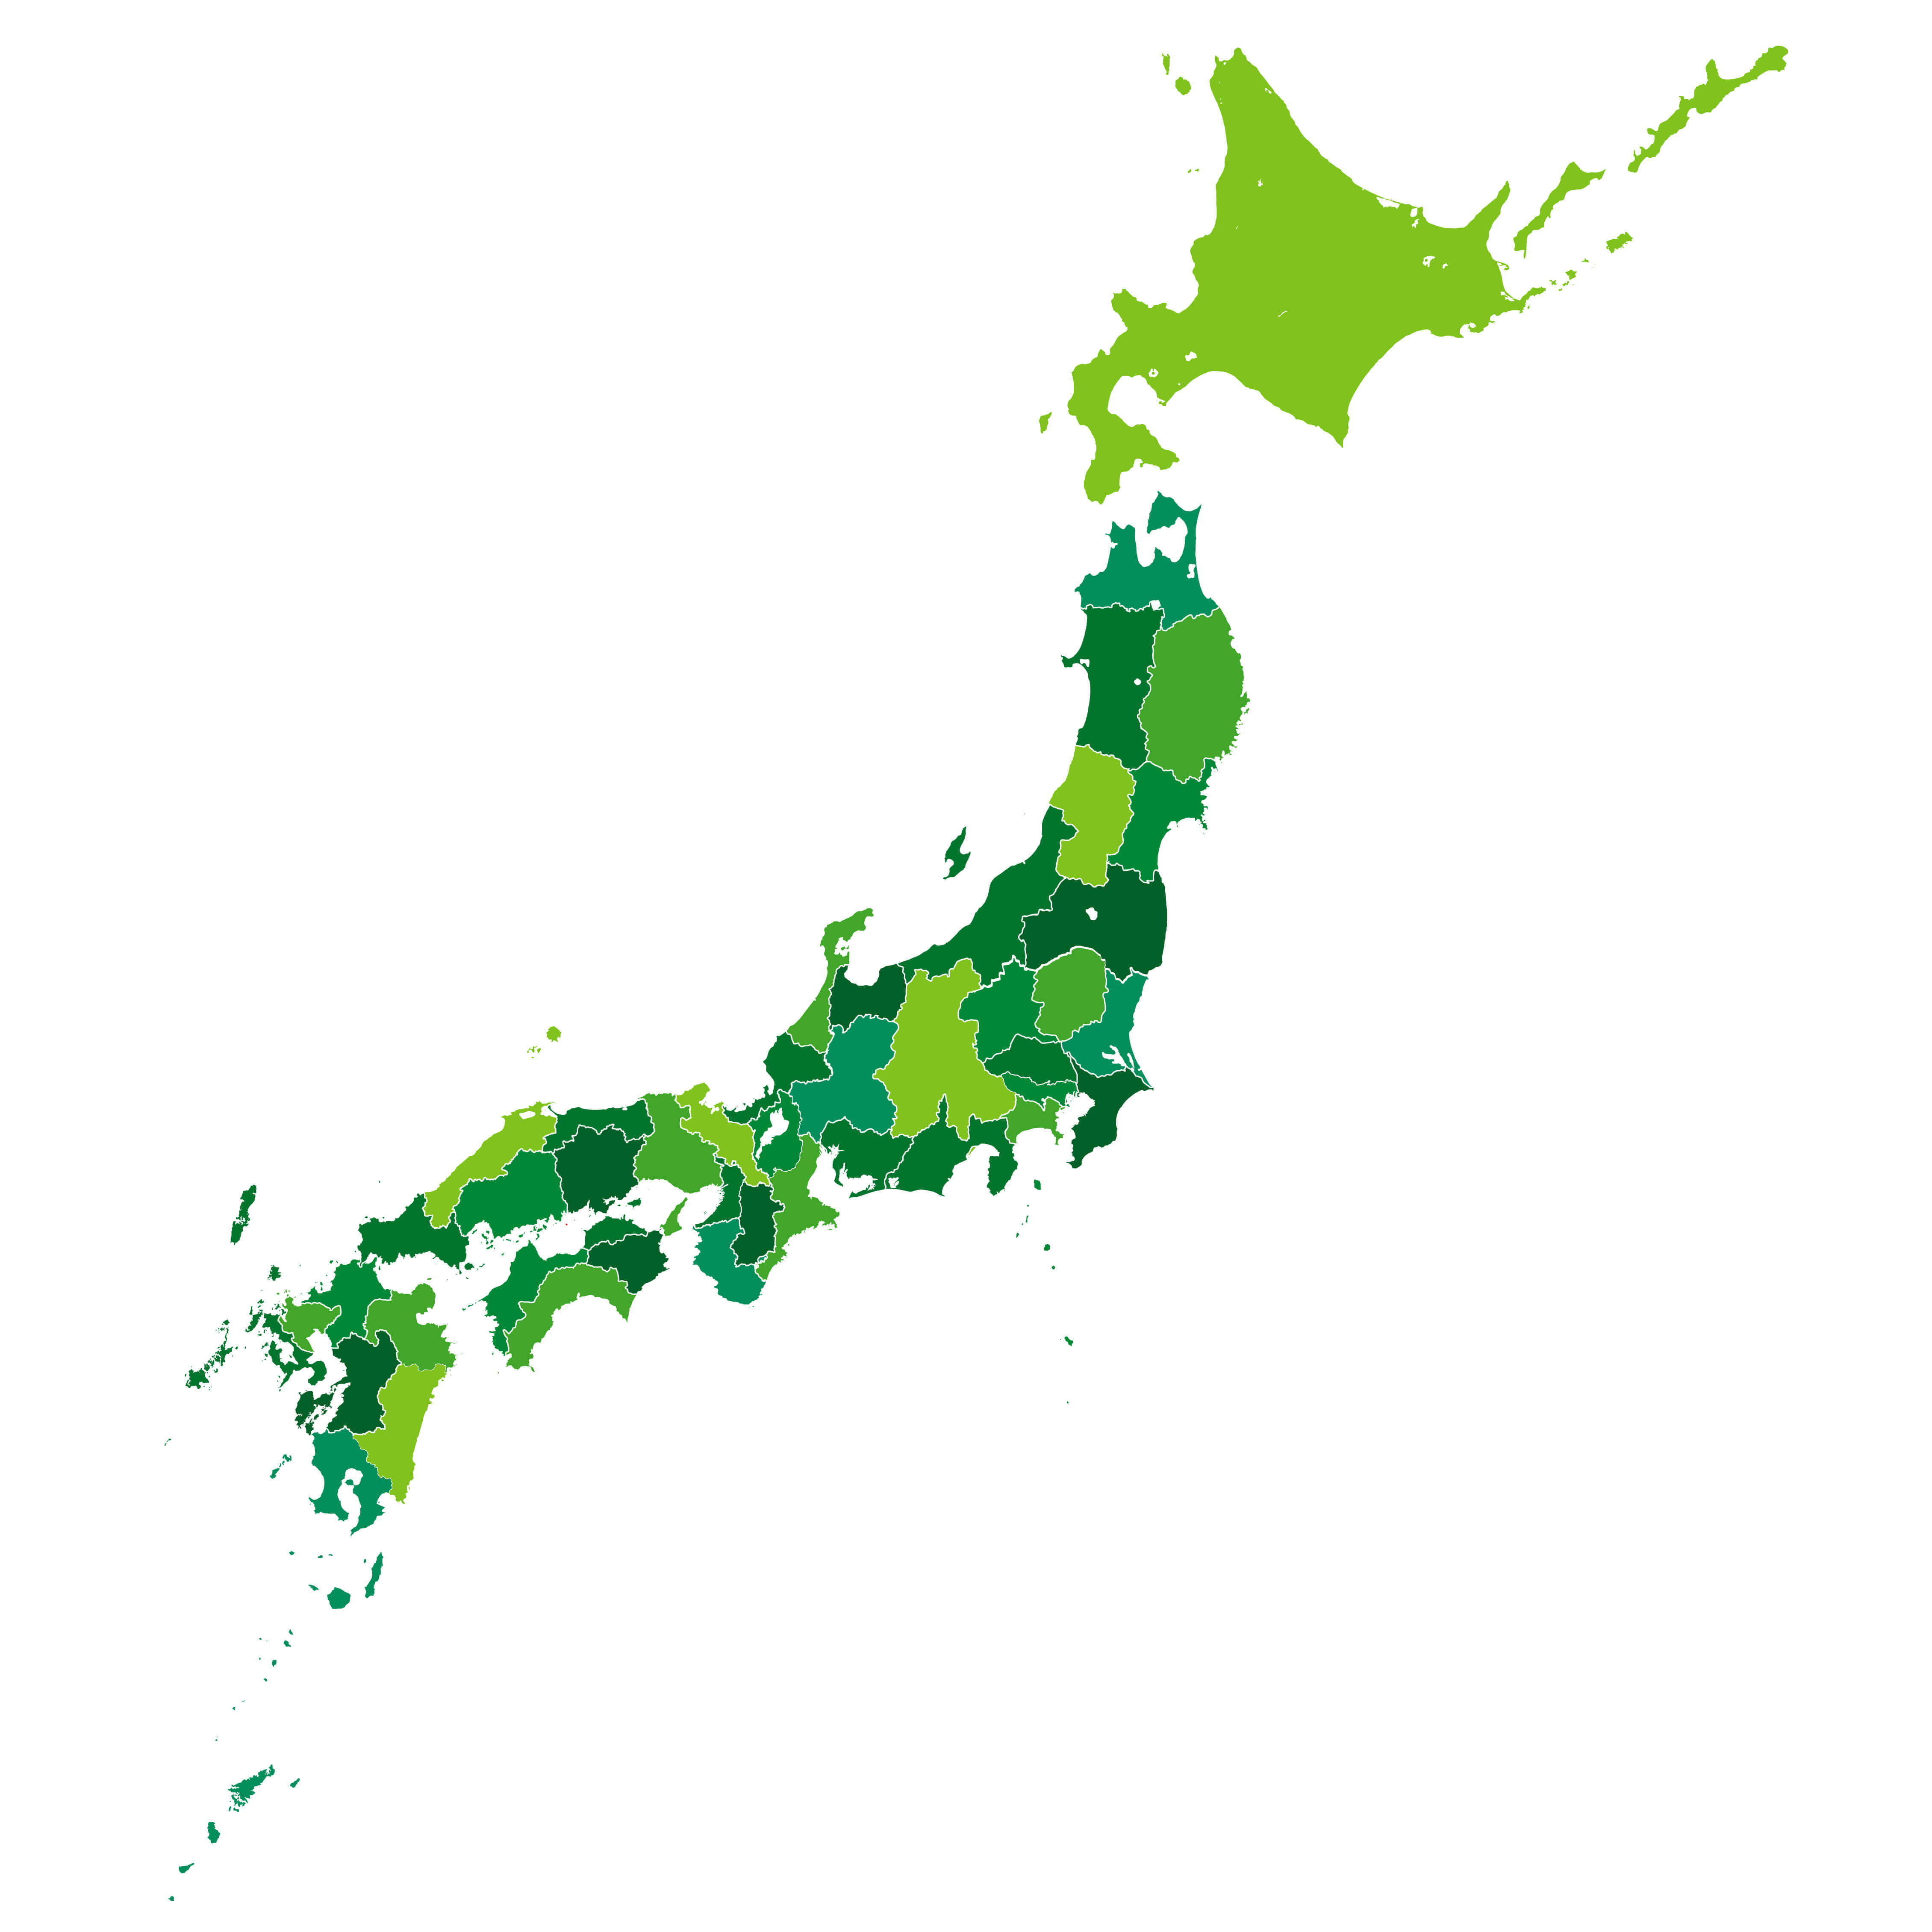 Japan Colorful Blank Map